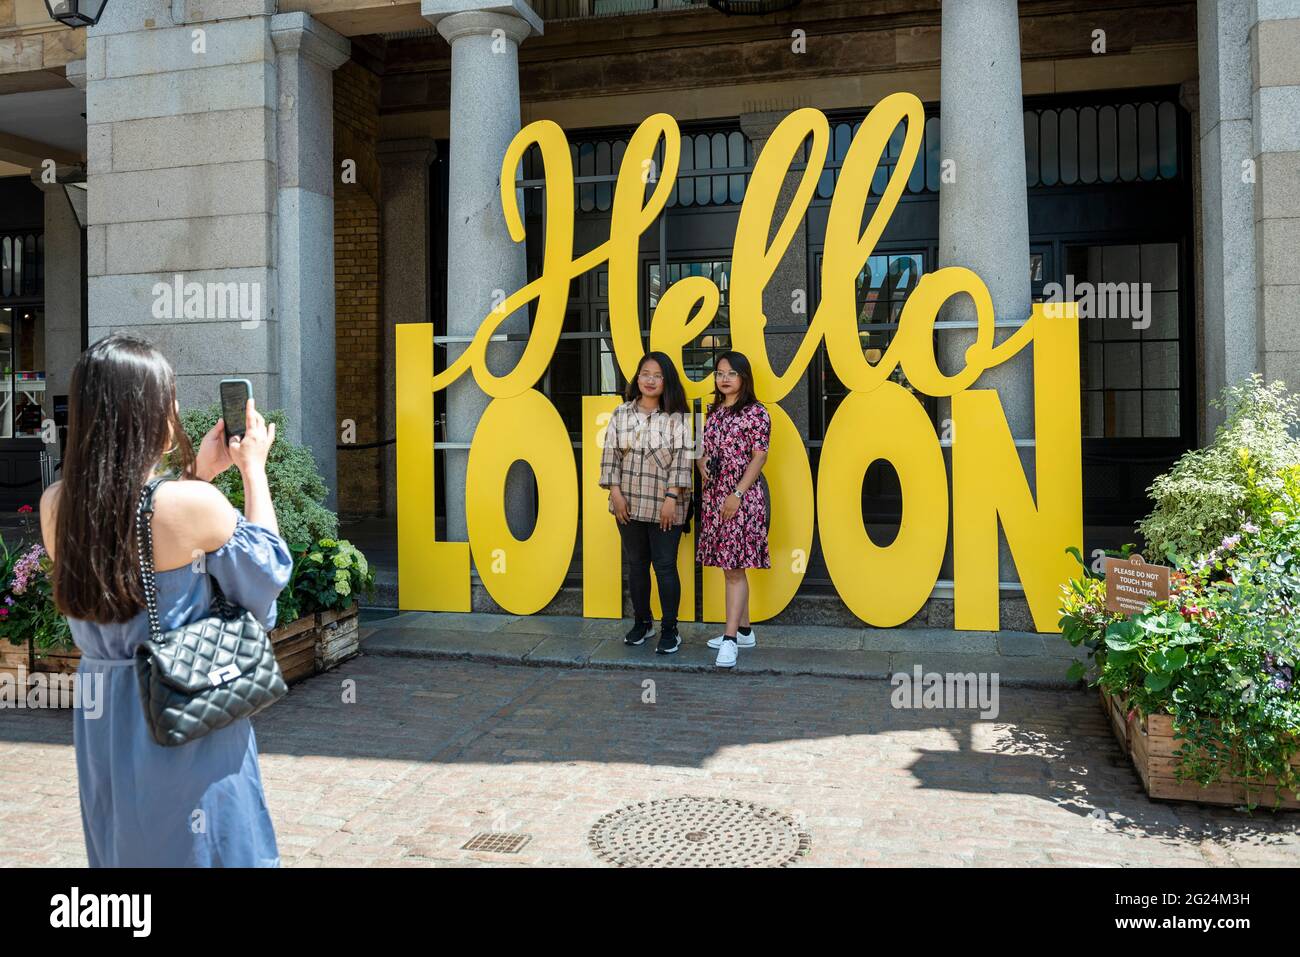 London, UK.  8 June 2021. Women take photos next to a Hello London sign in Covent Garden.  The area has experienced reduced footfall due to the ongoing pandemic.  Local shops and related businesses are hoping that the relaxation of lockdown restrictions on 21 June will lead to the return of tourists and shoppers.  Credit: Stephen Chung / Alamy Live News Stock Photo